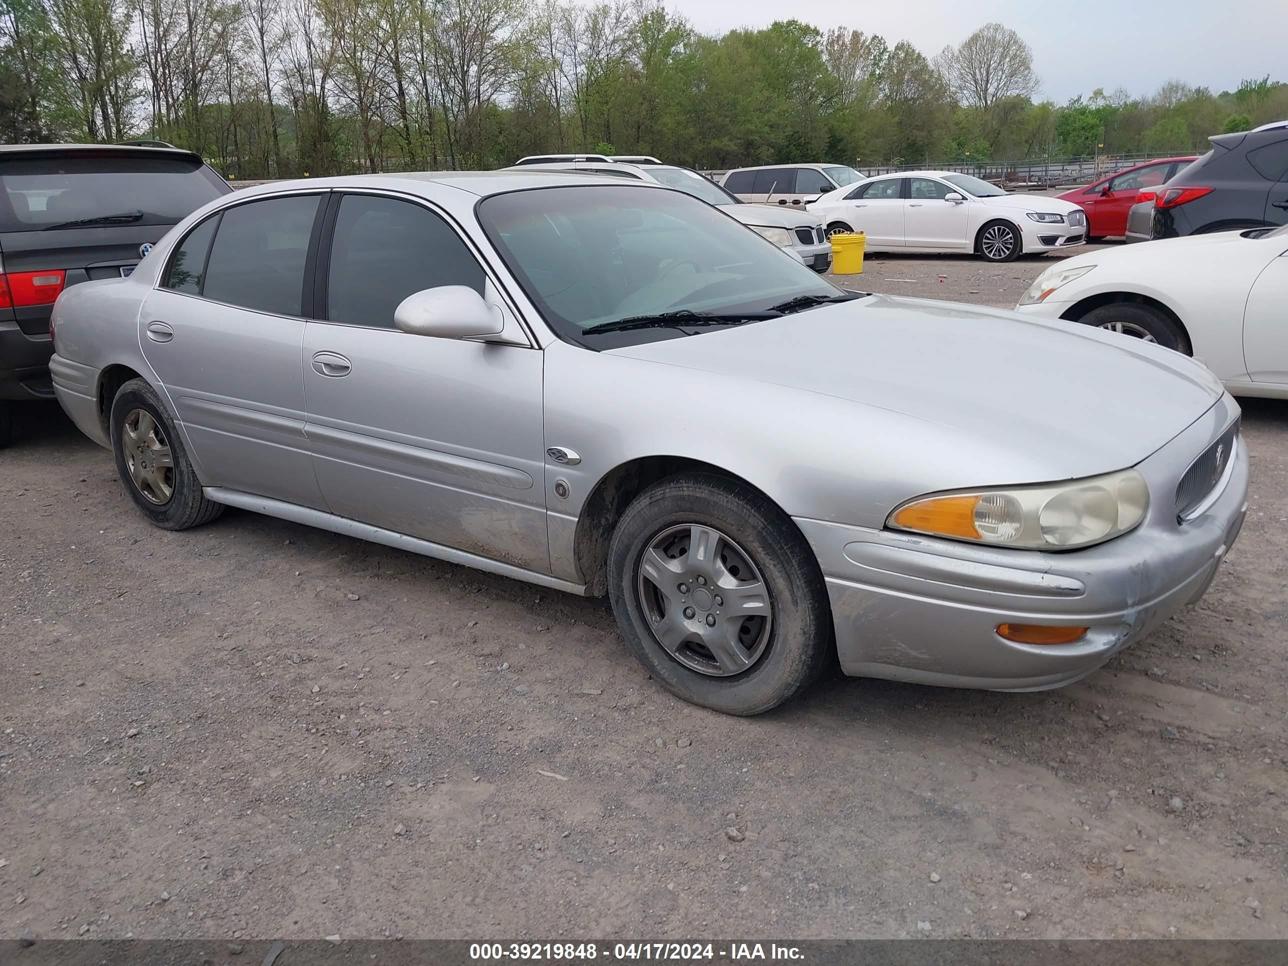 vin: 1G4HP52K23U130056 1G4HP52K23U130056 2003 buick lesabre 3800 for Sale in 37914, 3634 E. Governor John Sevier Hwy, Knoxville, Tennessee, USA